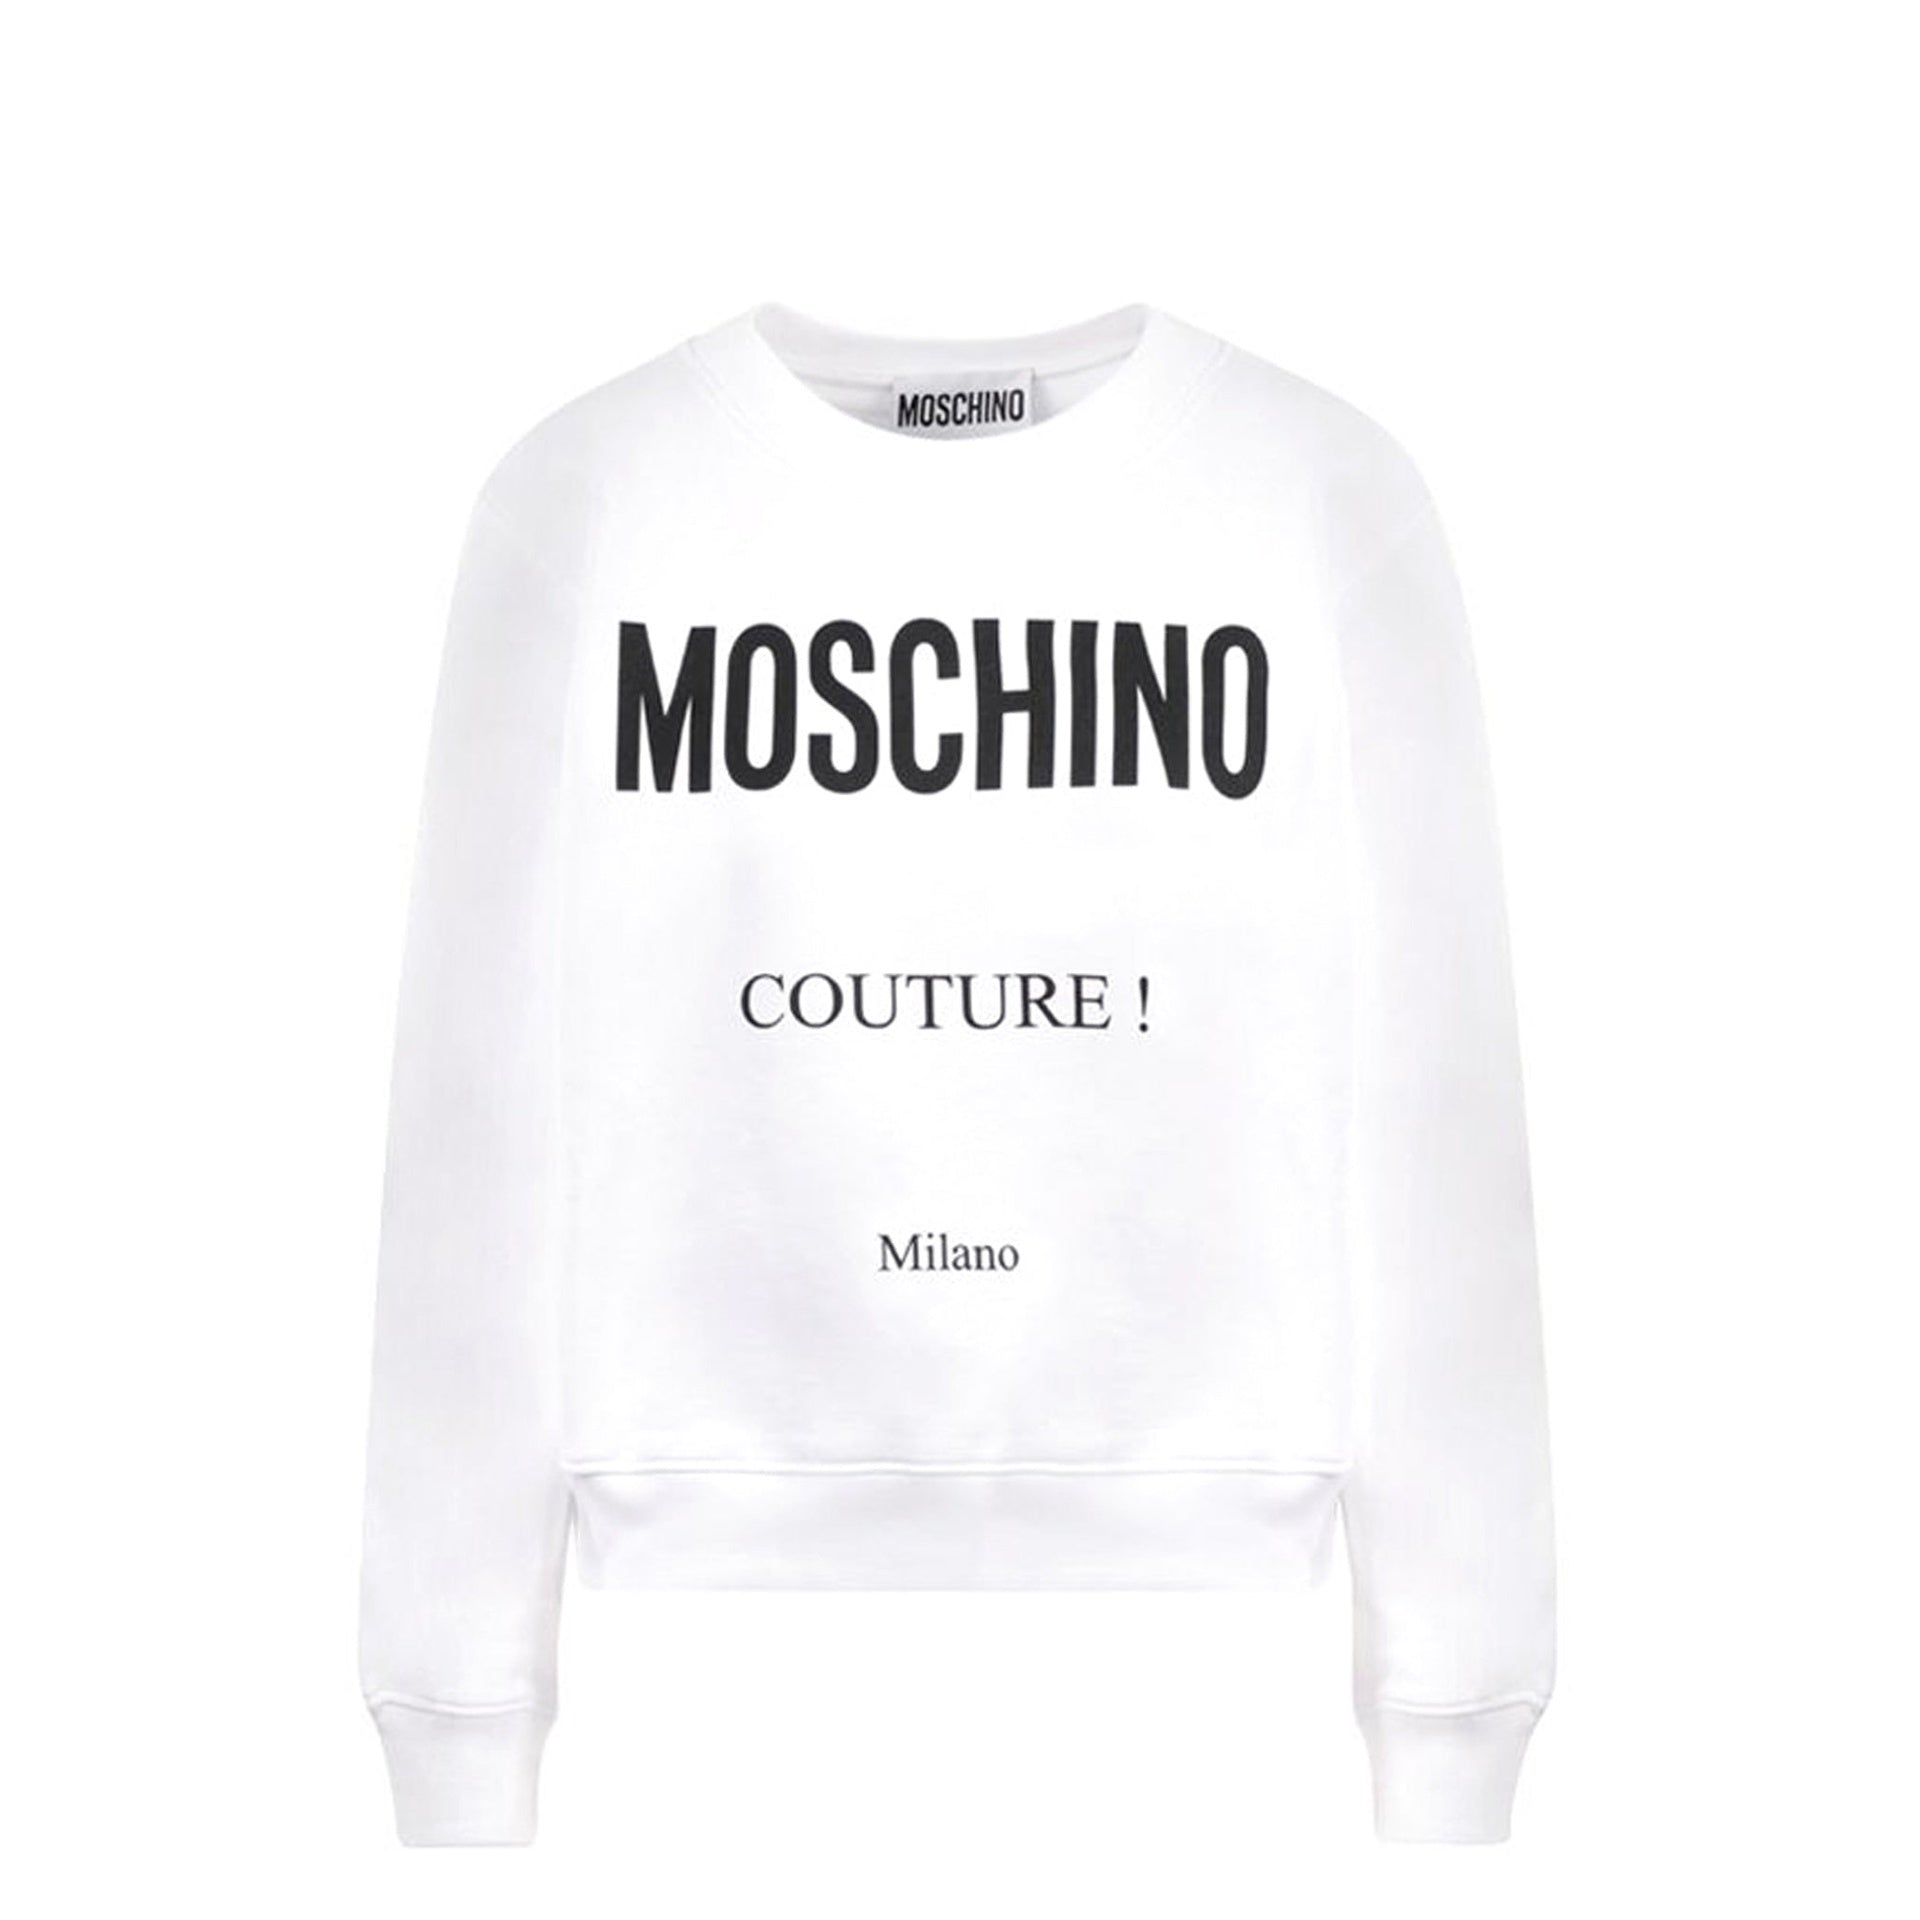 MOSCHINO-COUTURE-OUTLET-SALE-Moschino-Couture-Cotton-Logo-Sweatshirt-Shirts-WHITE-40-ARCHIVE-COLLECTION.jpg